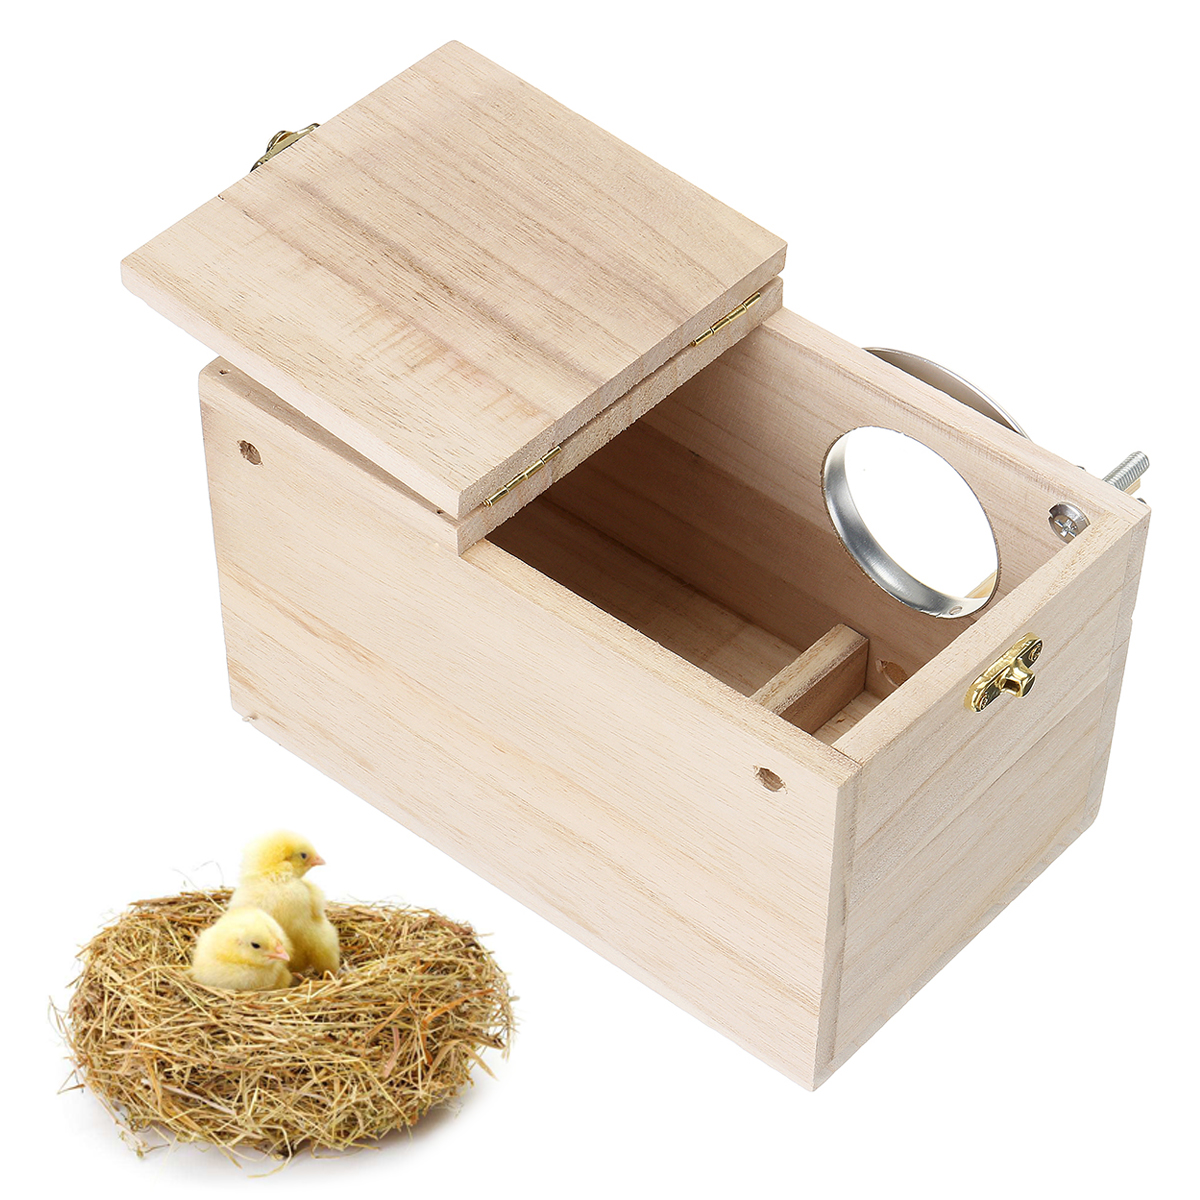 Budgie-Wooden-Box-Breeding-Boxes-Aviary-Bird-House-Nesting-w-Stick-Window-Security-Pet-Supplies-Home-1582150-7